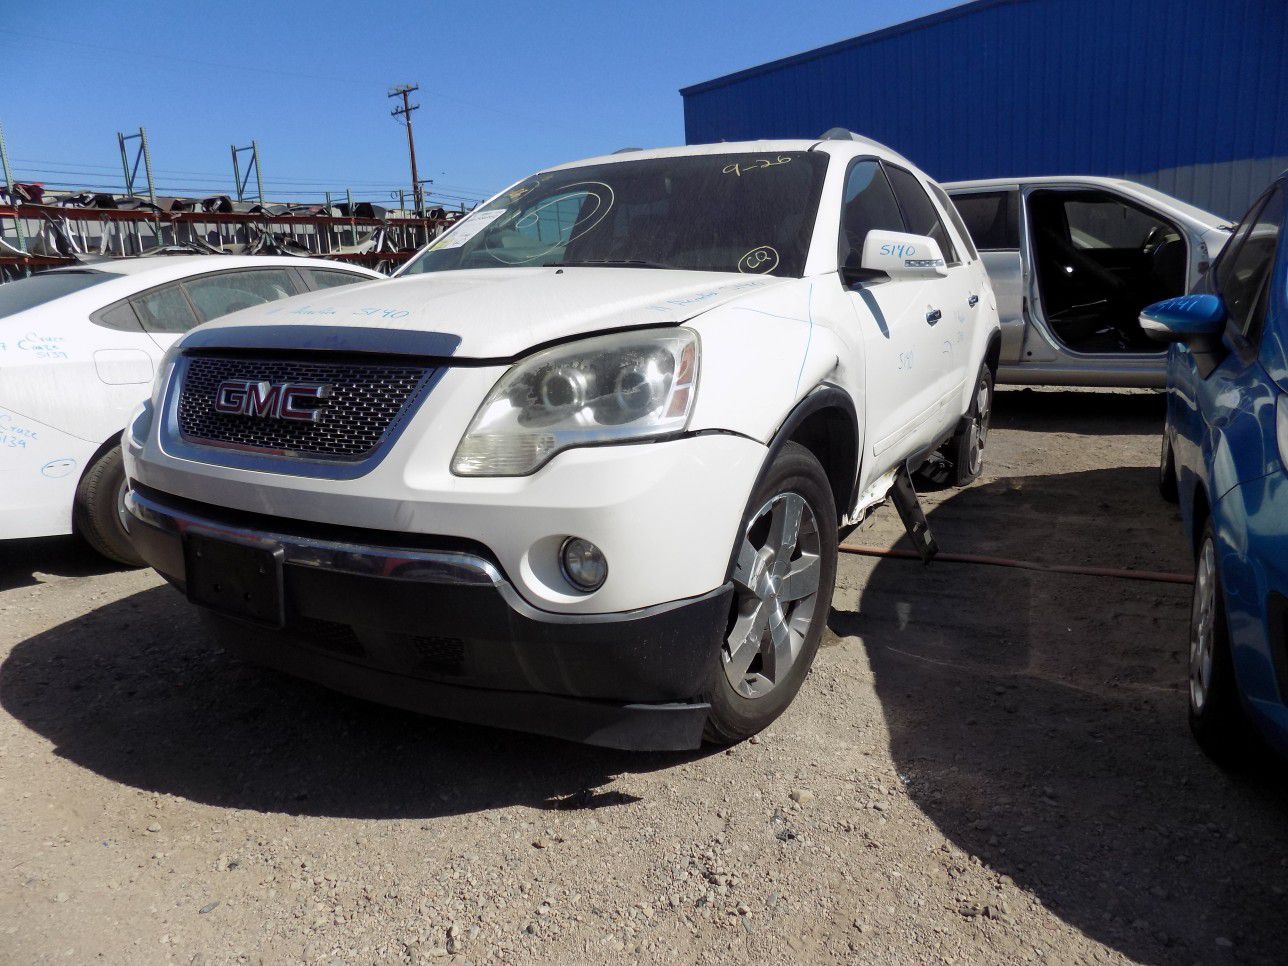 2011 GMC Acadia SLT (Parting Out)